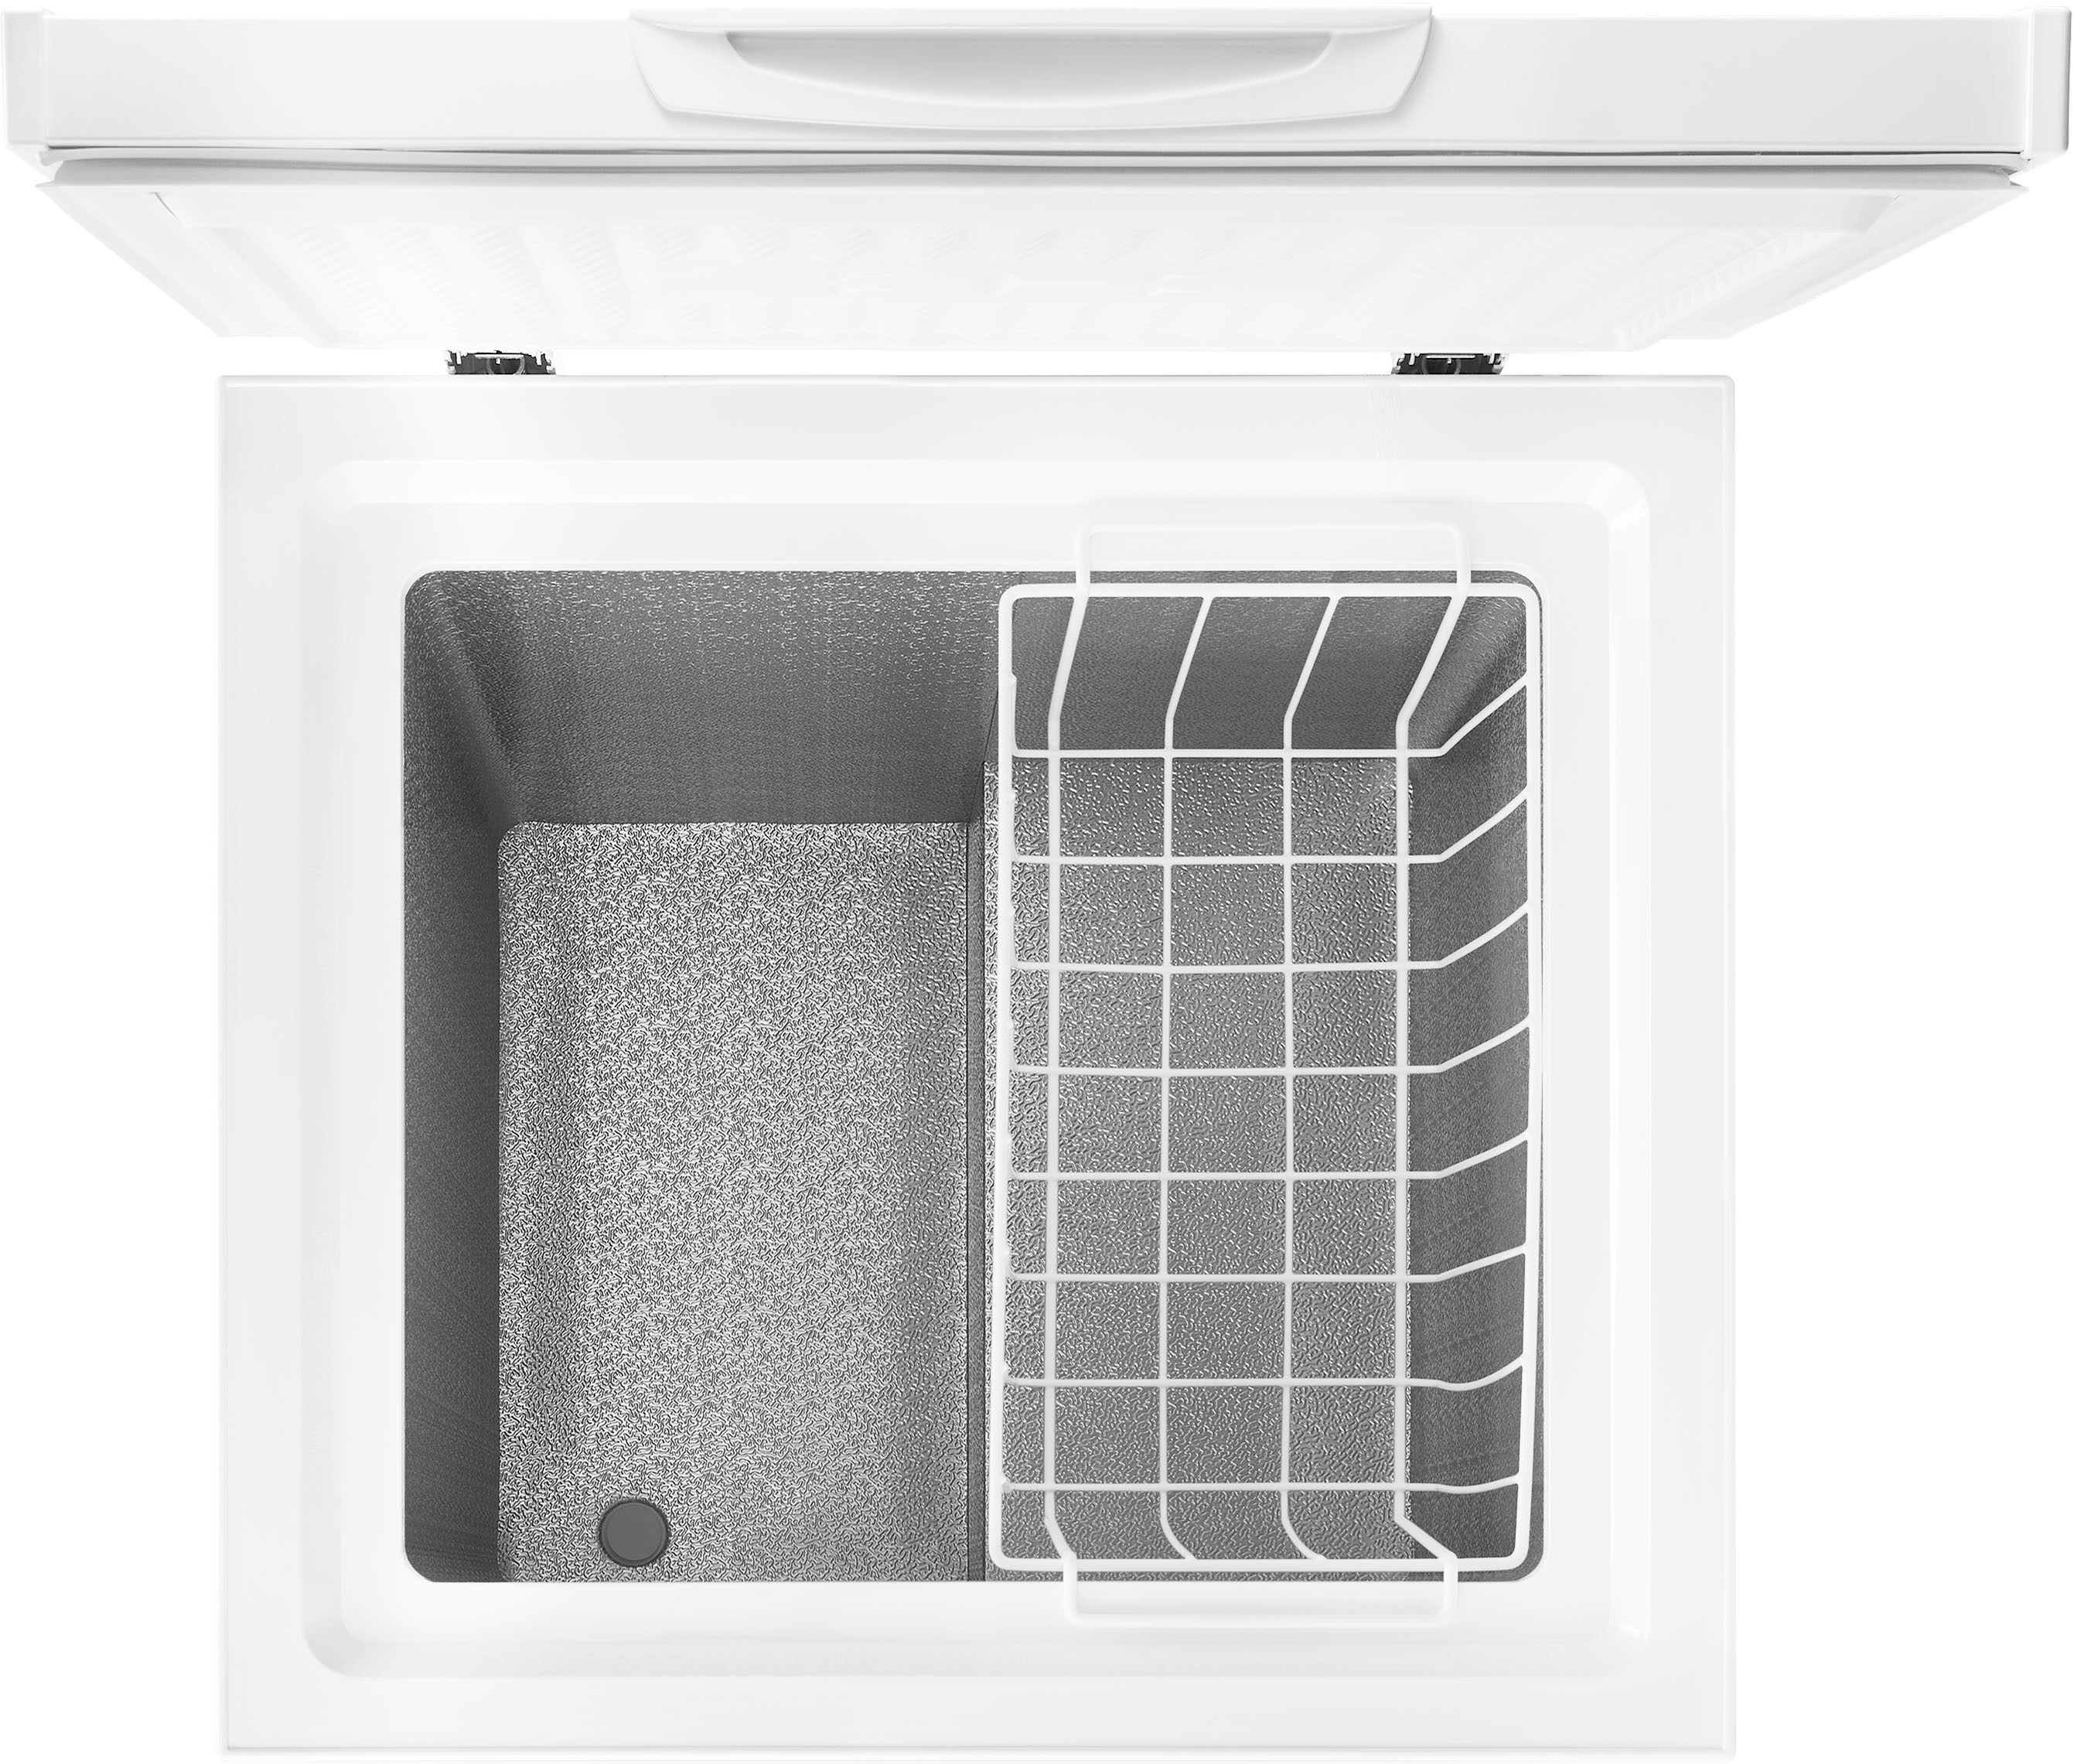 Honeywell 3.5 cu. Ft. Chest Freezer with Storage Basket in White H35CFW -  The Home Depot